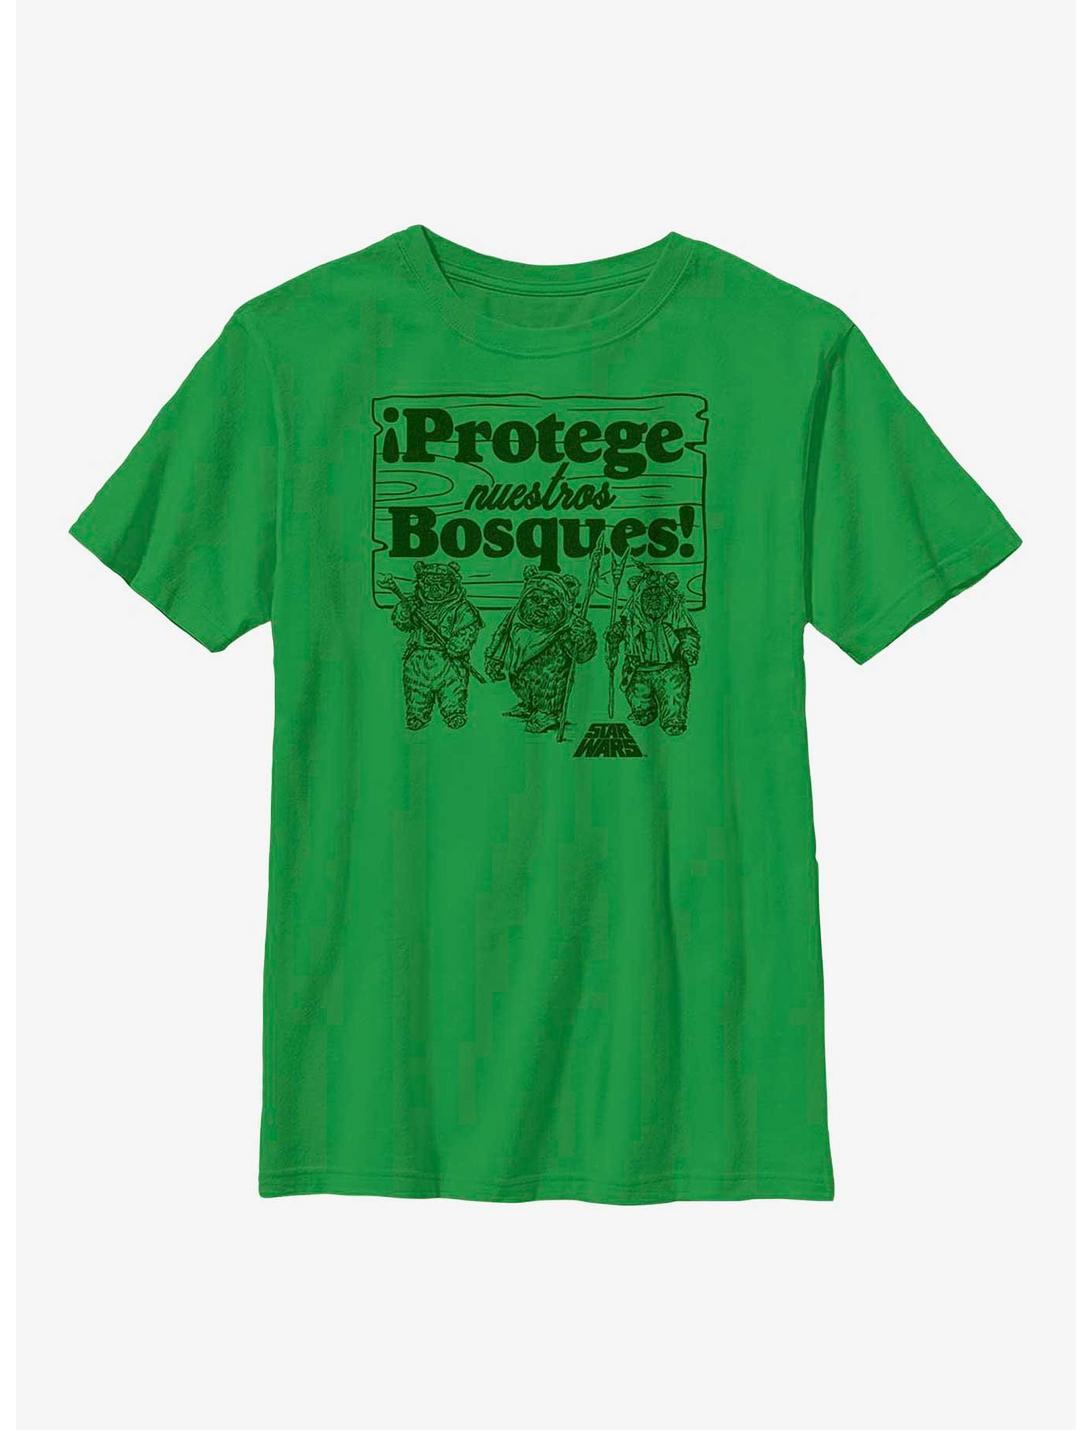 Star Wars Protege Nuestros Bosques Protect Our Forests Youth T-Shirt, KELLY, hi-res